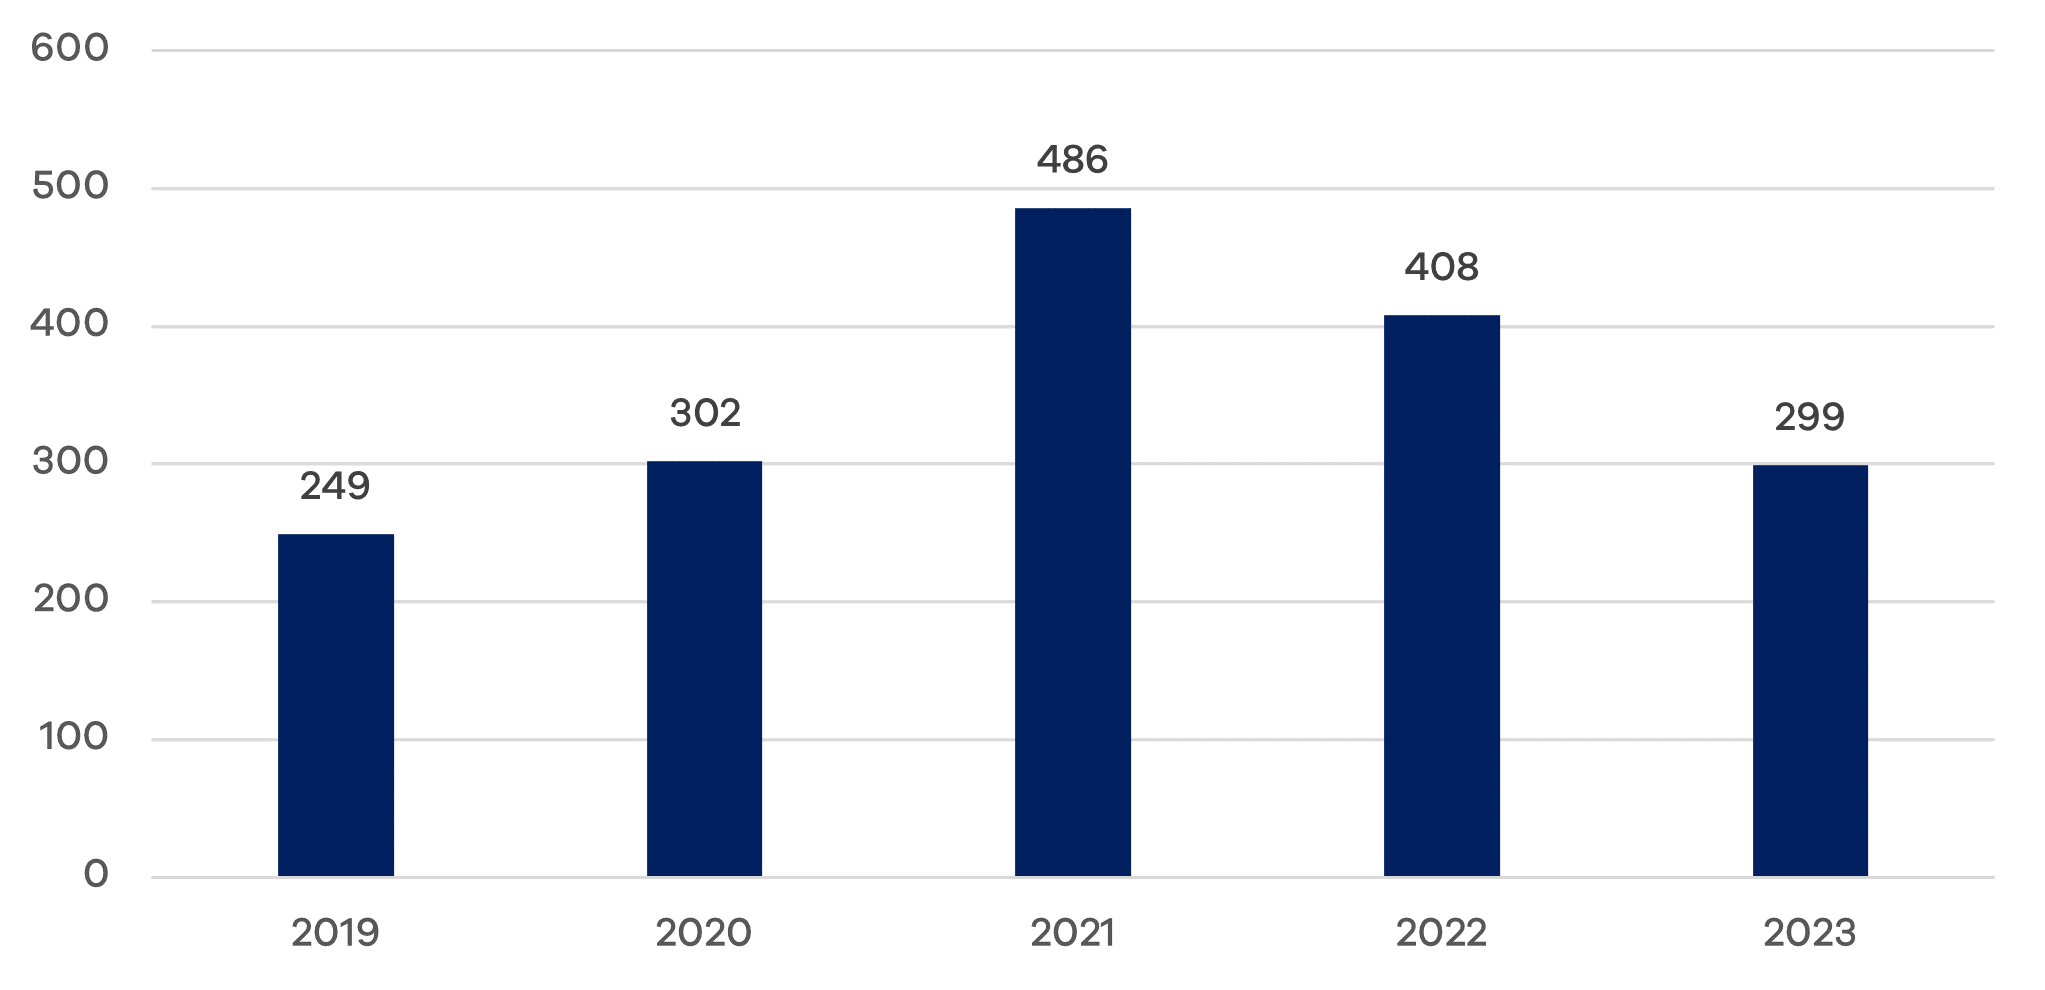 Bar chart from 2019 to 2023 showing the number of UK companies acquired by US businesses. The highest is 2021 with 486.